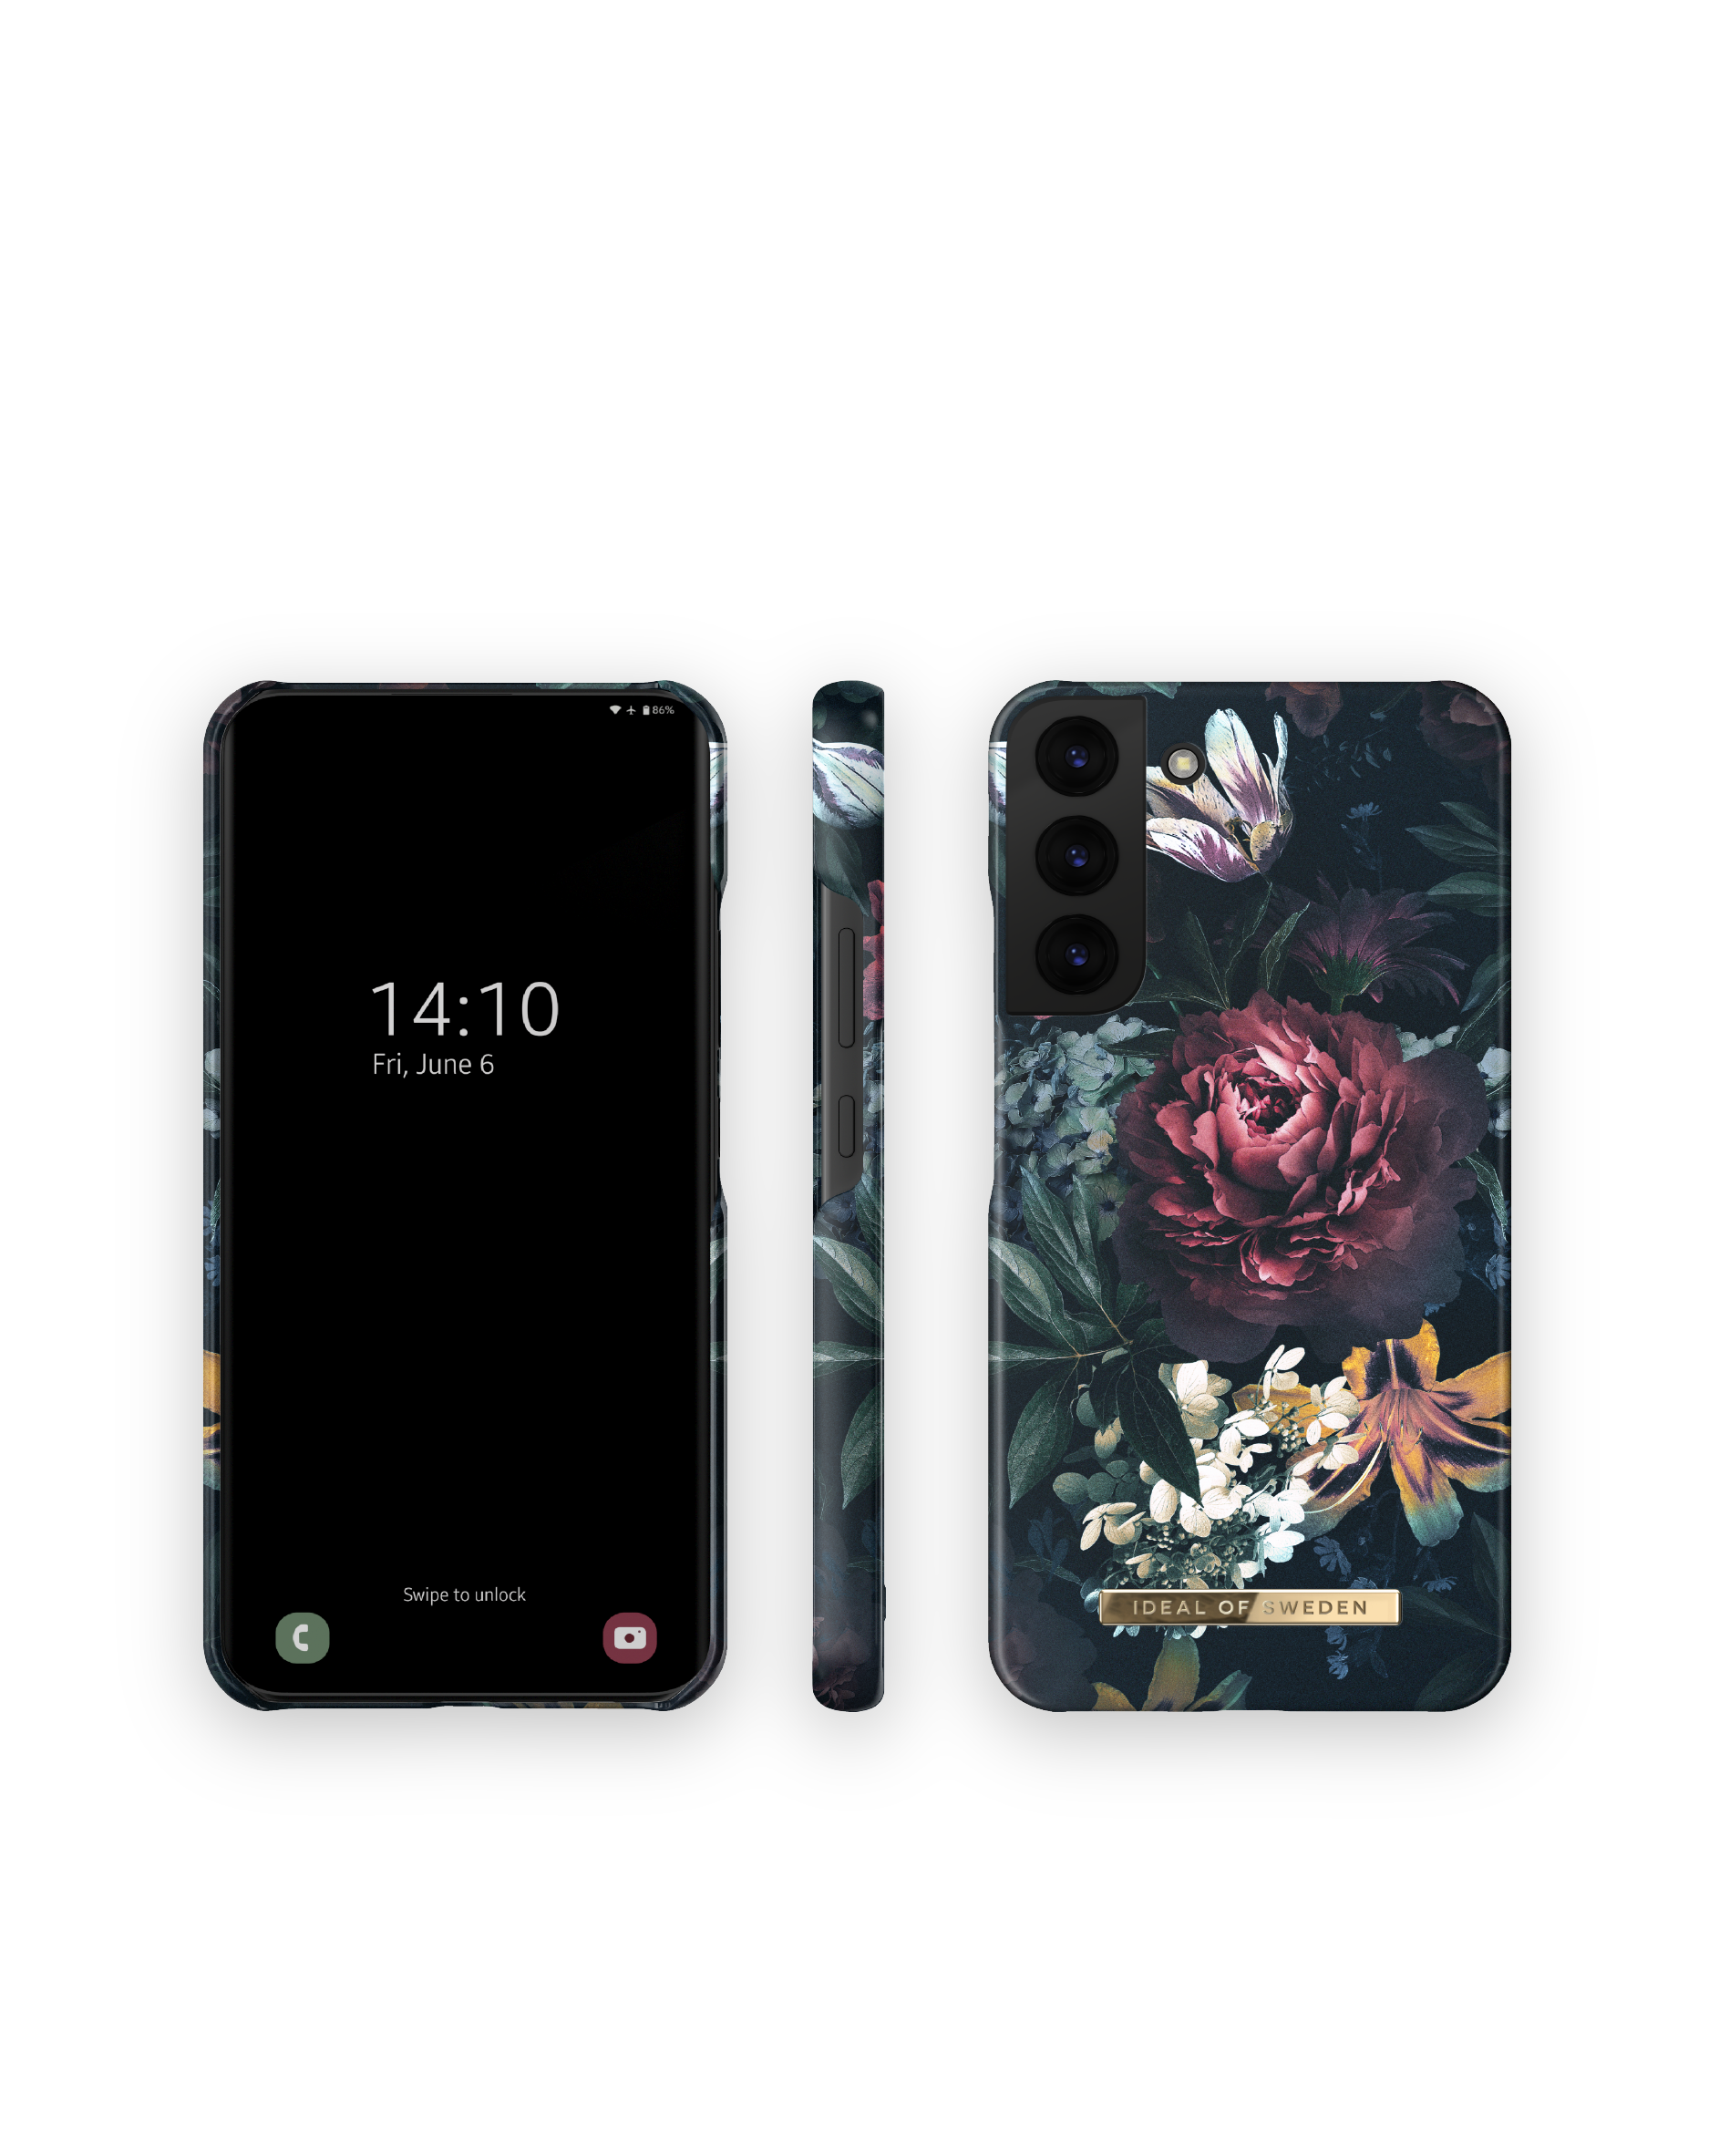 IDFCAW21-S22P-355, Bloom Samsung, OF IDEAL SWEDEN S22 Galaxy Dawn Plus, Backcover,